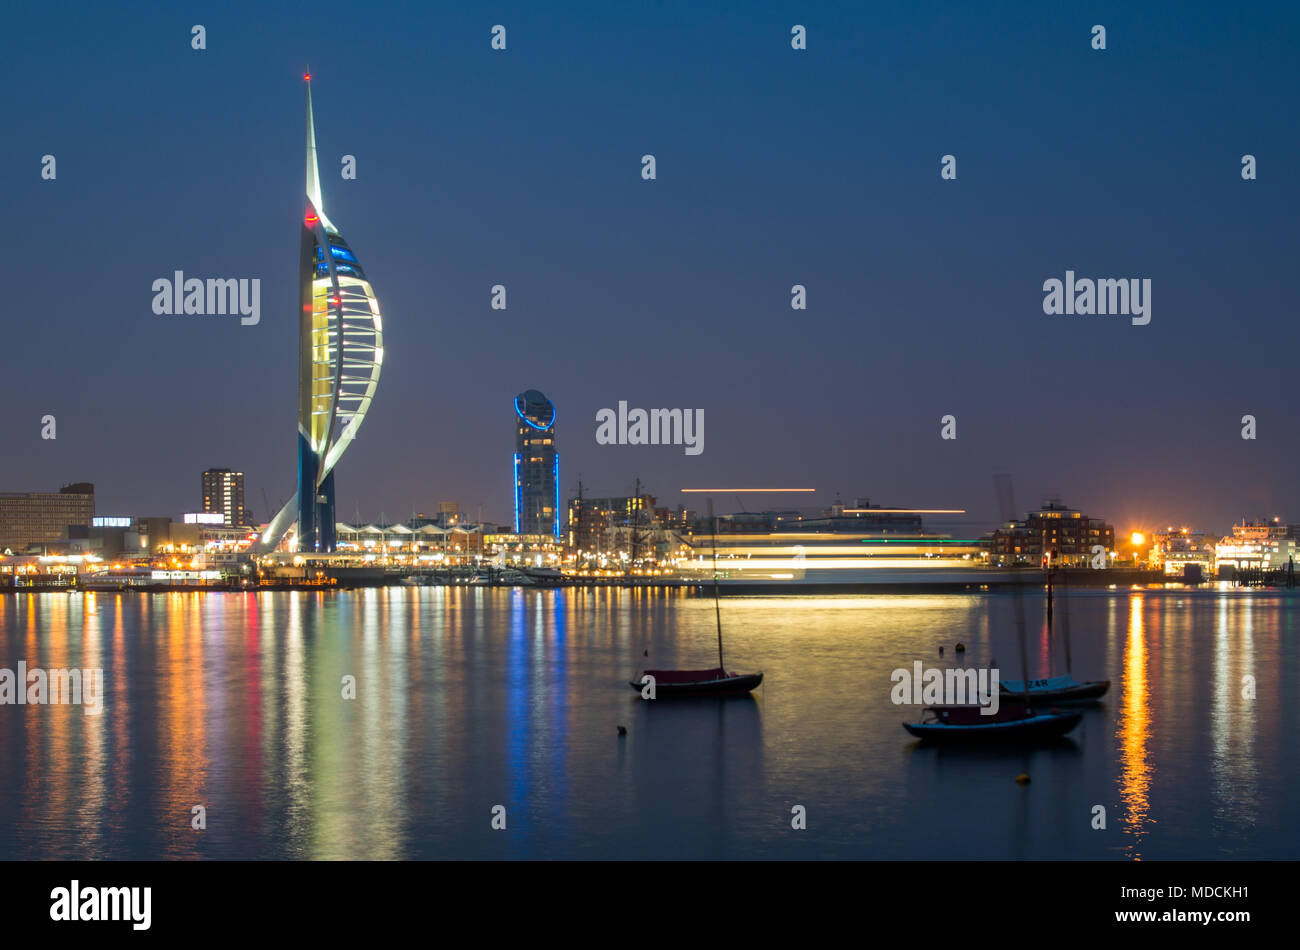 A long exposure night shot of Portsmouth harbour with few boats in the foreground, blurred shape of a passing ferry and illuminated Spinnaker tower. Stock Photo